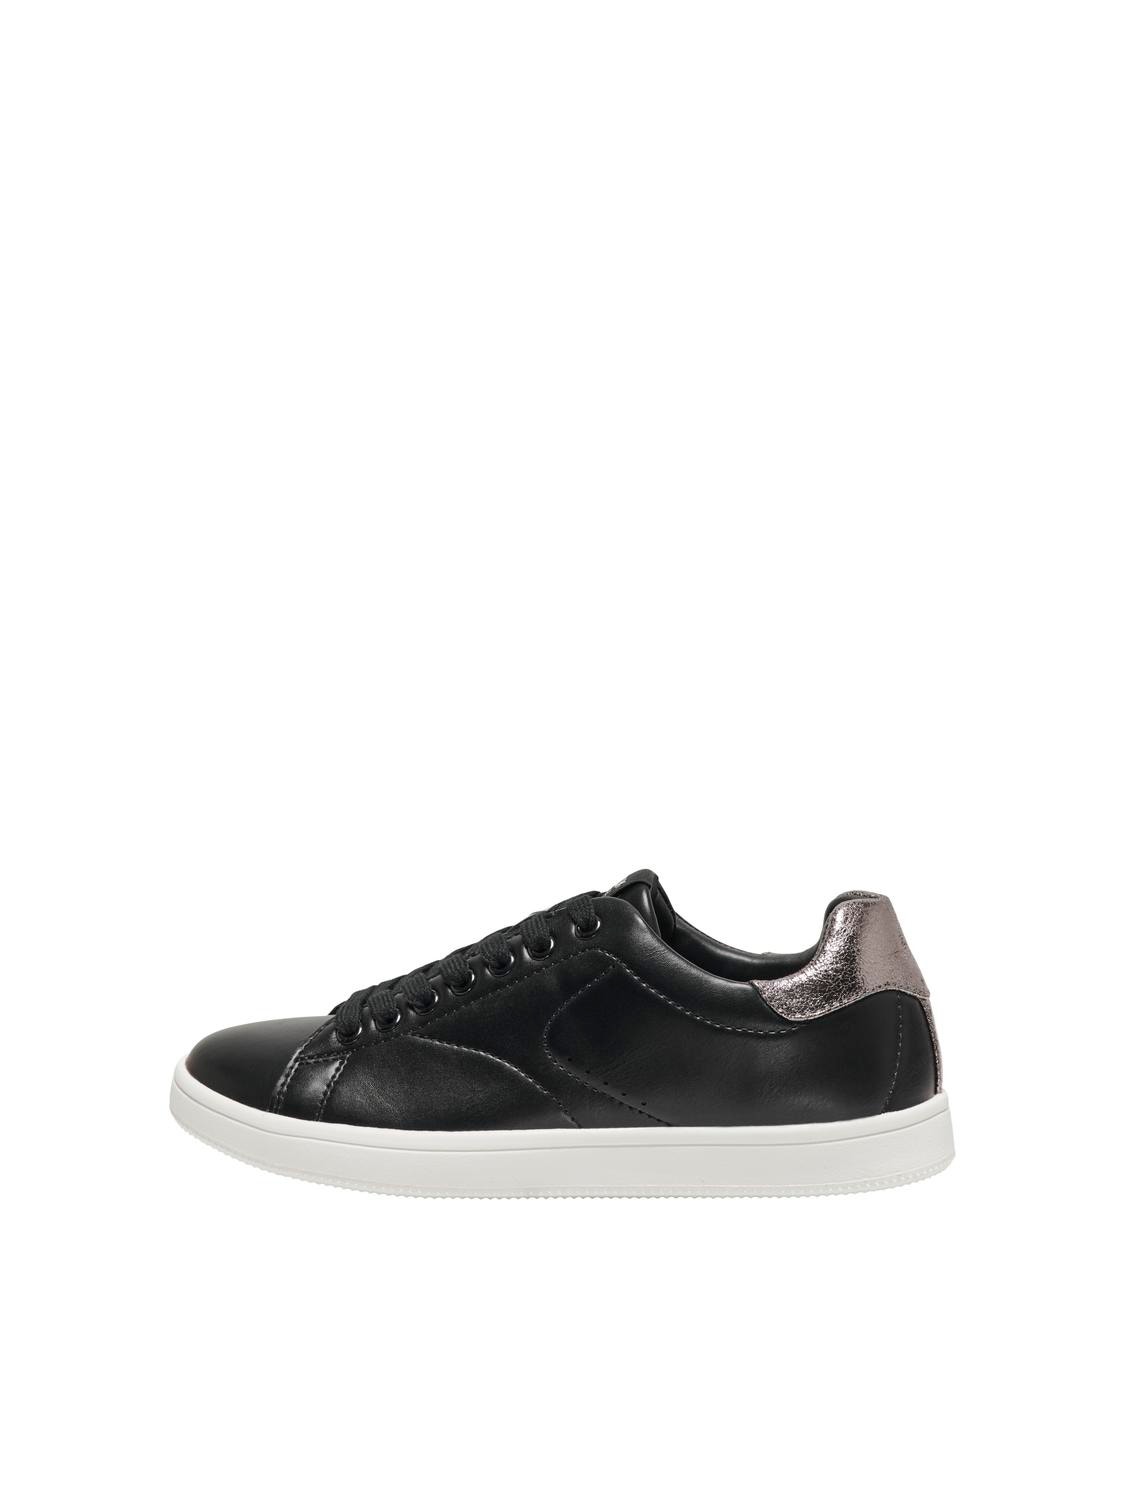 ONLY Round toe Sneaker -Black - 15288082